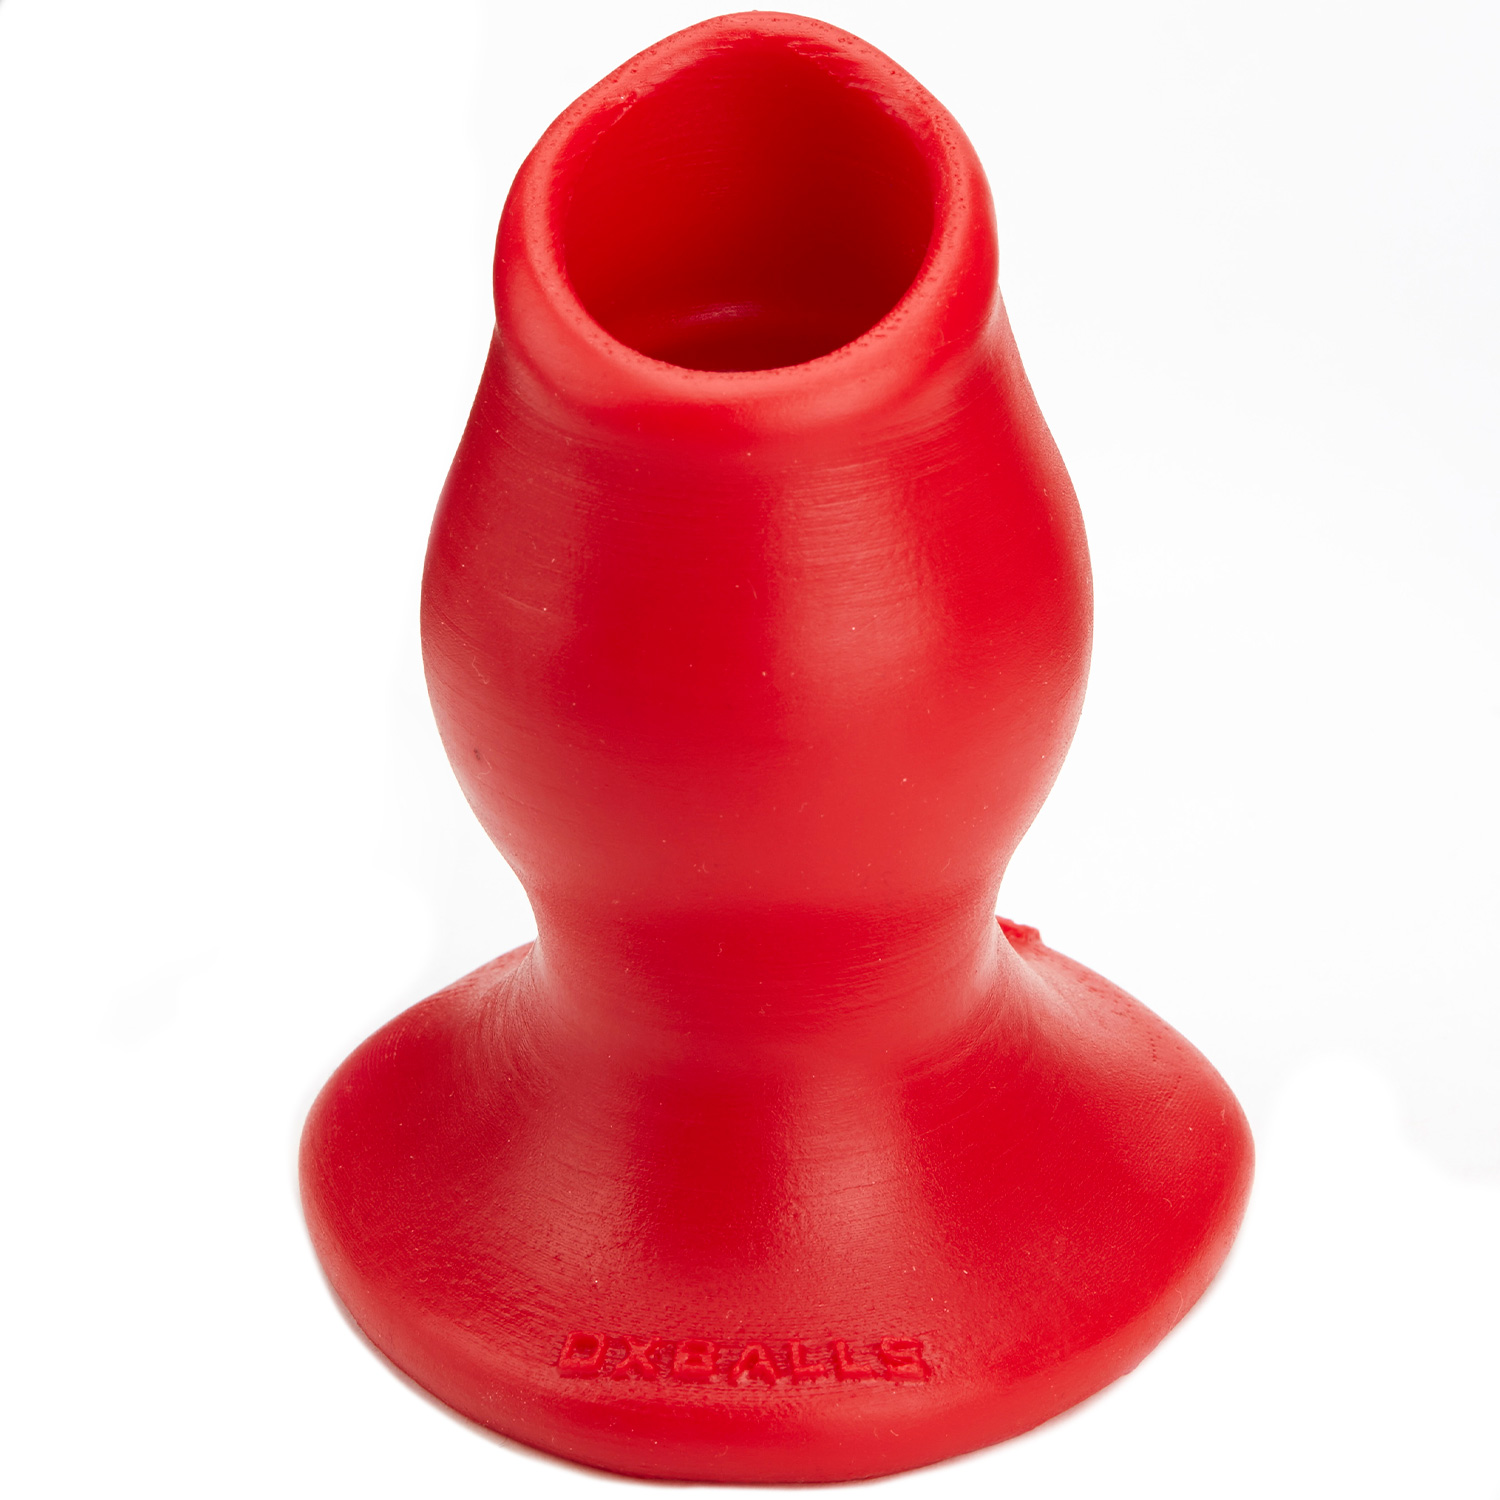 Umschnalldildo 7,5' Hollow Squirting Strap-on with Balls, mit Spritzfunktion